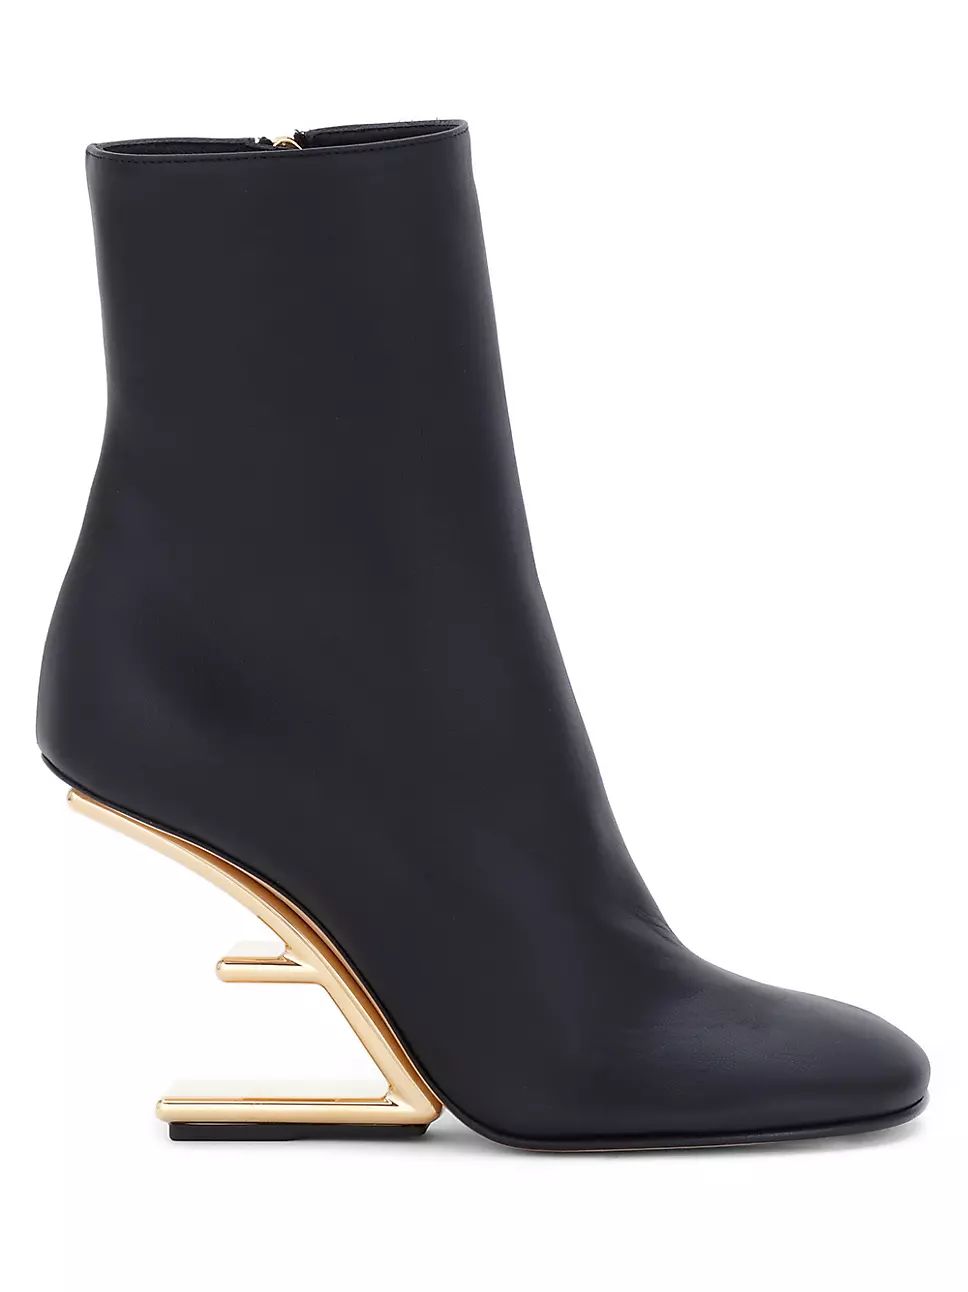 Fendi First Leather Wedge Booties | Saks Fifth Avenue